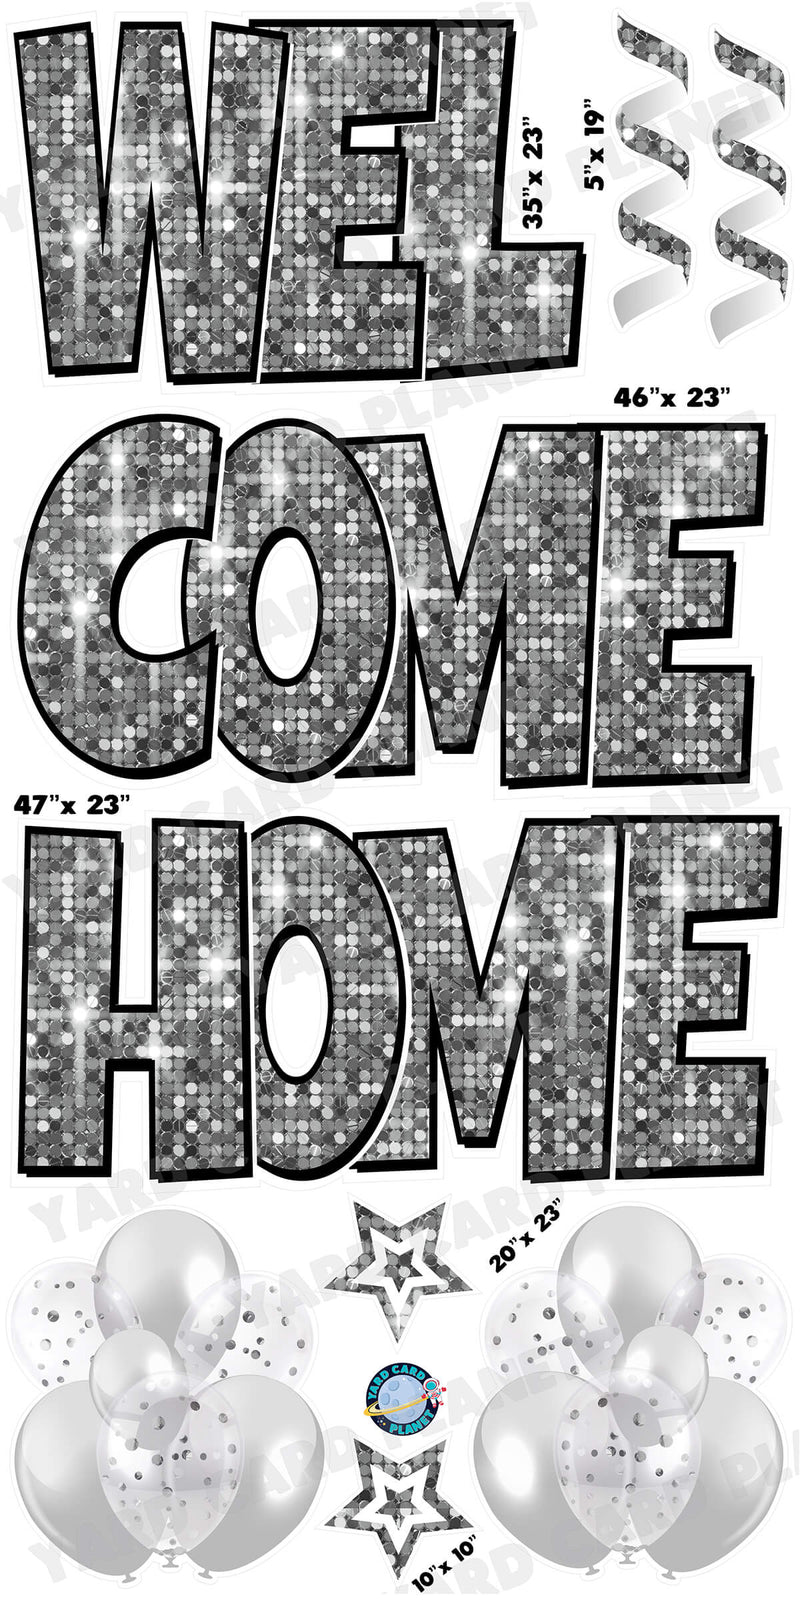 Large 23" Welcome Home Yard Card EZ Quick Sets in Luckiest Guy Font and Flair in Silver Sequin Pattern